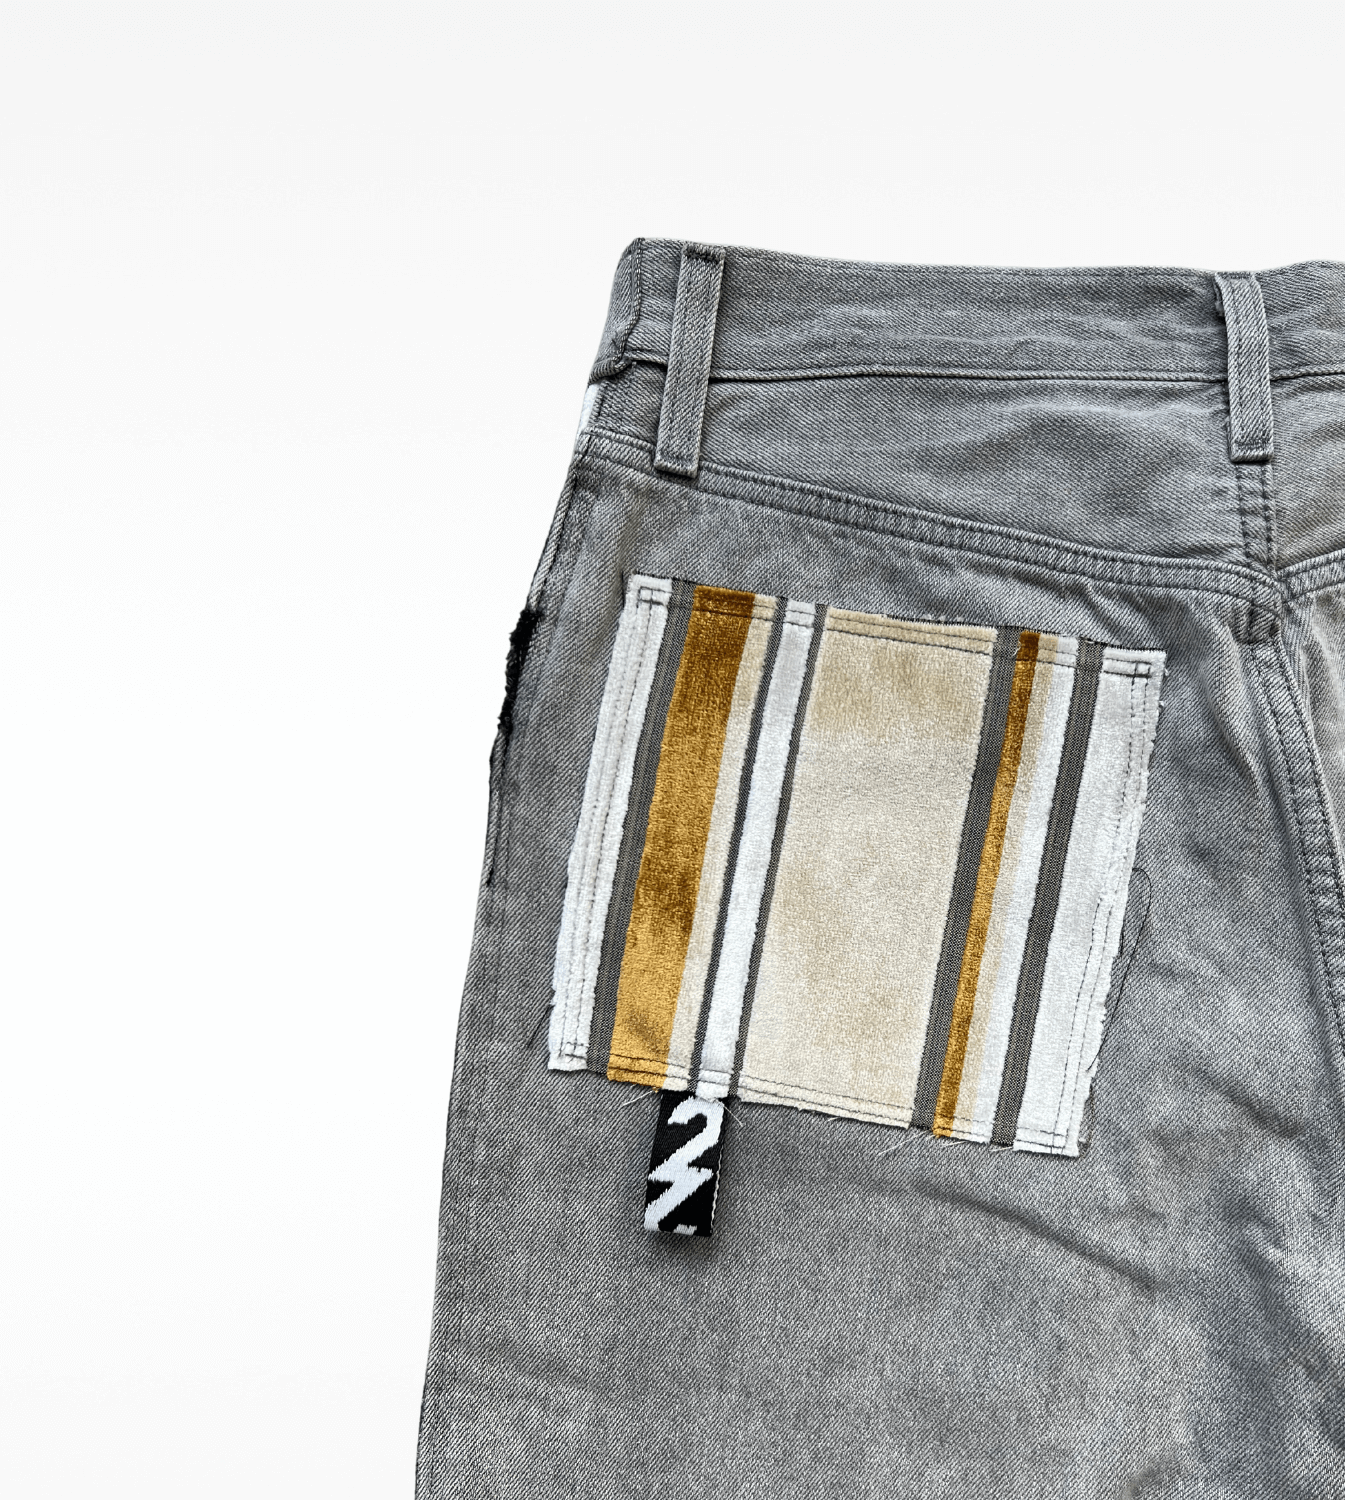 jeans-upcycling-levis-501-2ndechance-dos-details